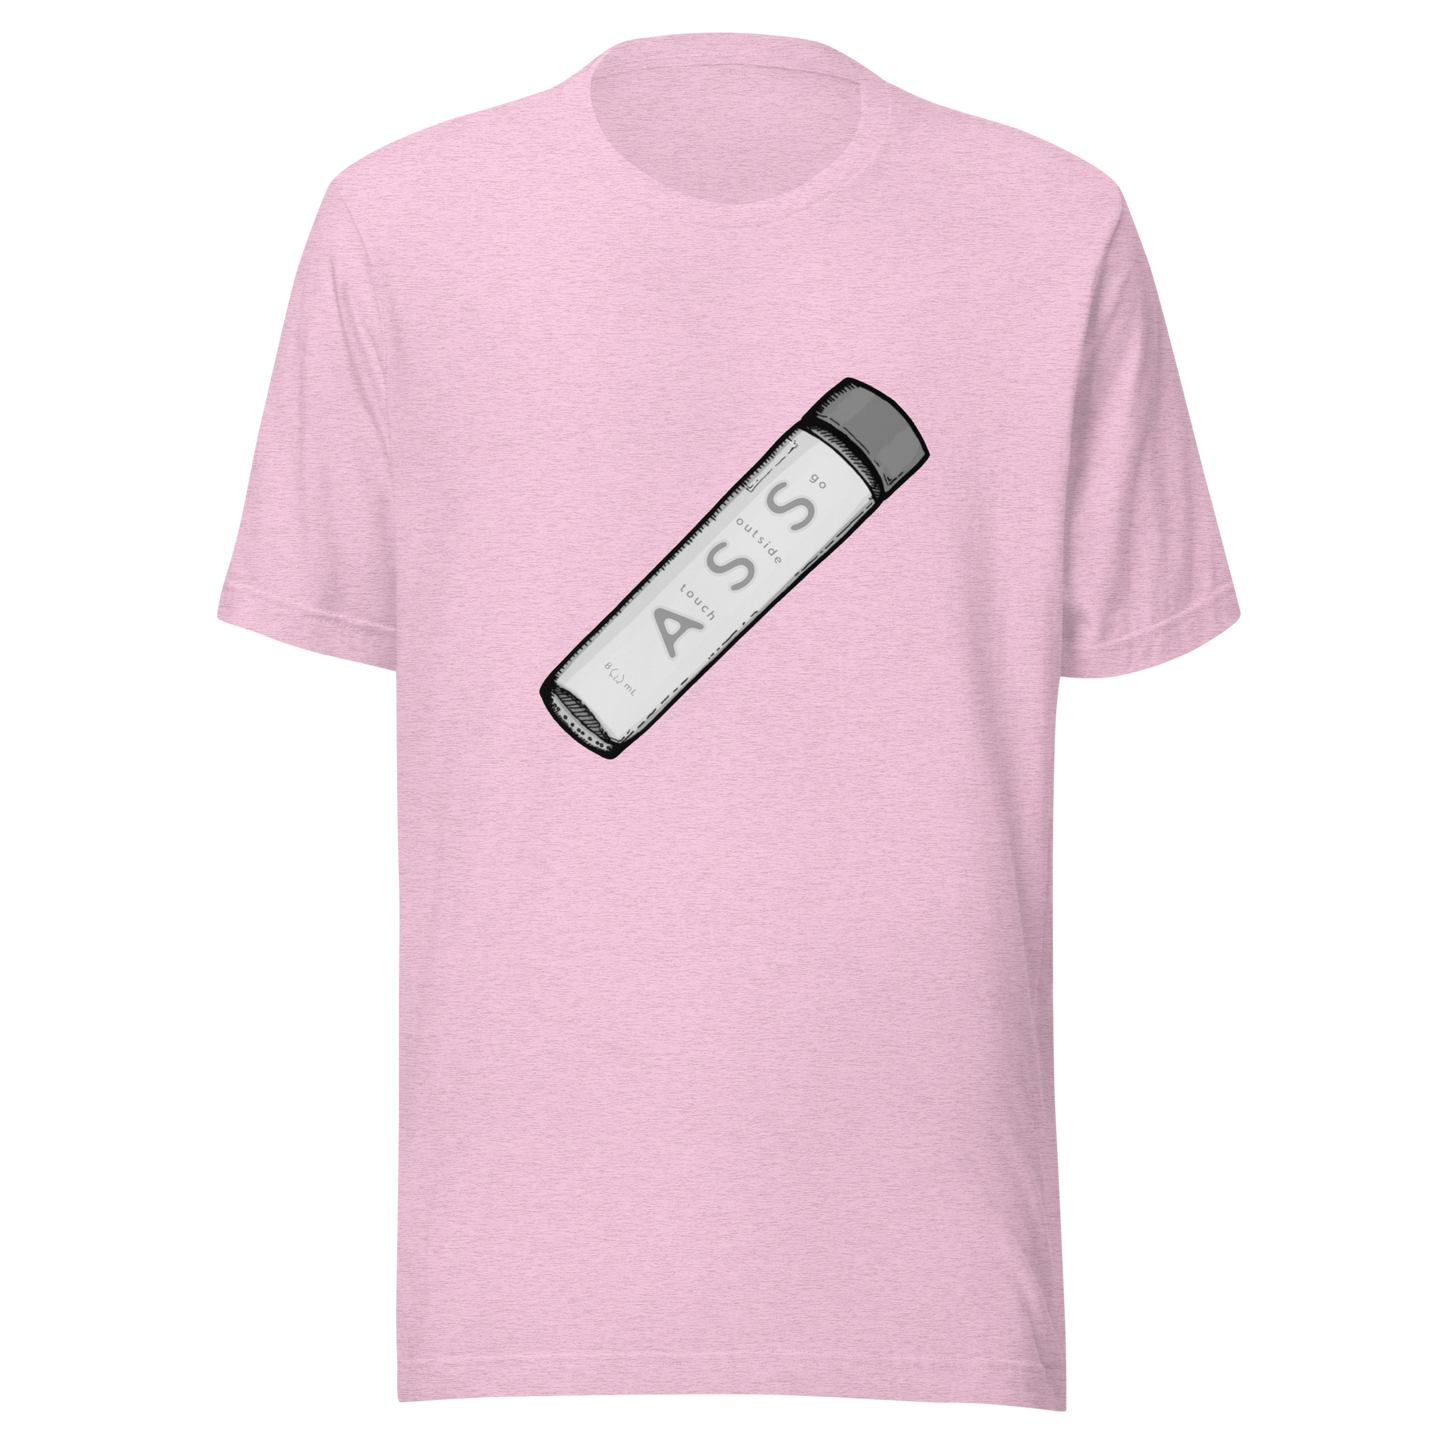 go outside touch ass t-shirt in pink - gaslit apparel